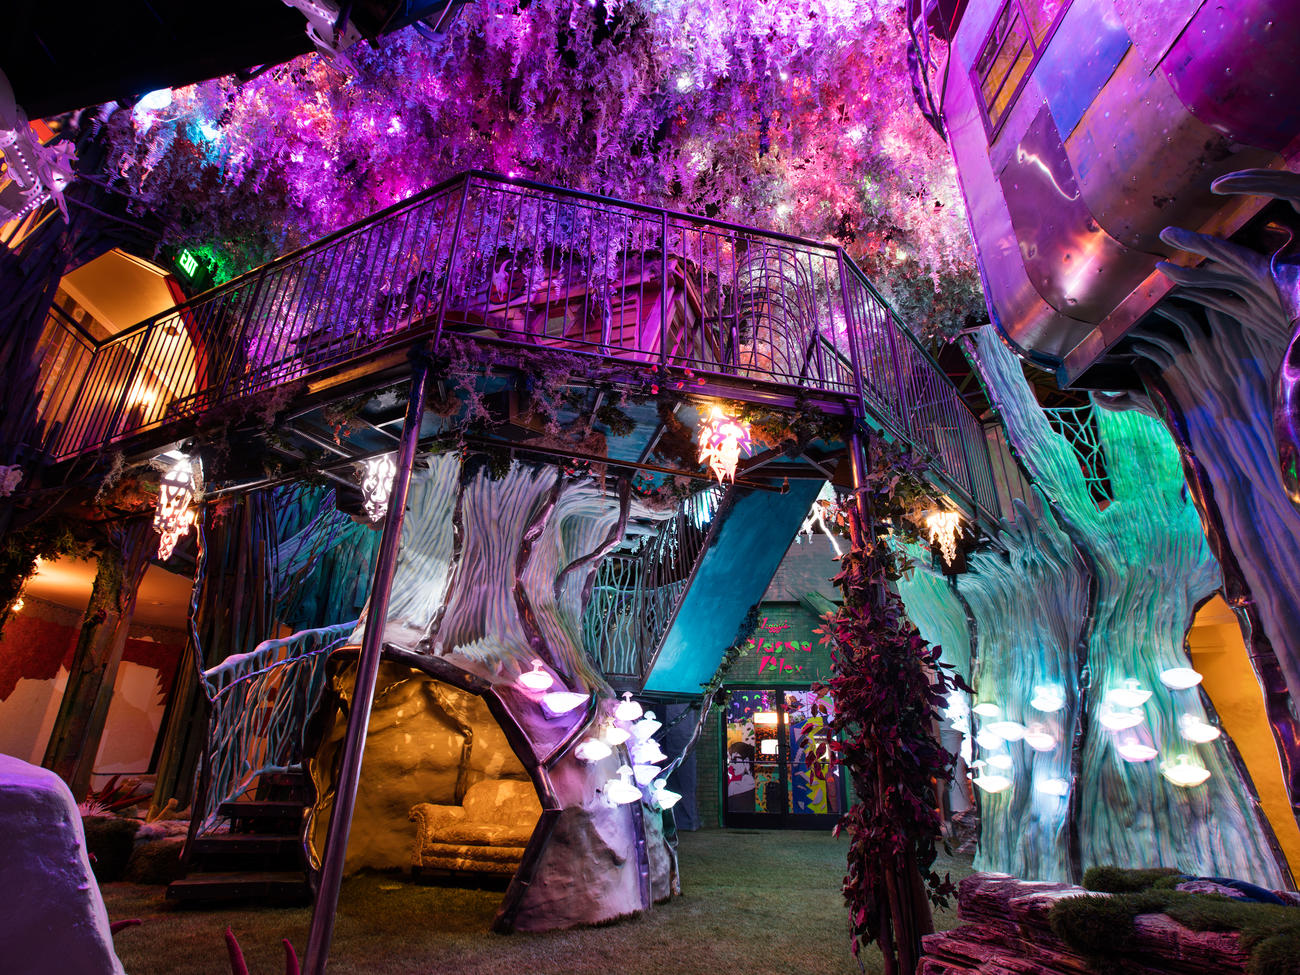 Not Going to Coachella? Get Your Festie Fix at These 5 Other Spring Happenings in the West